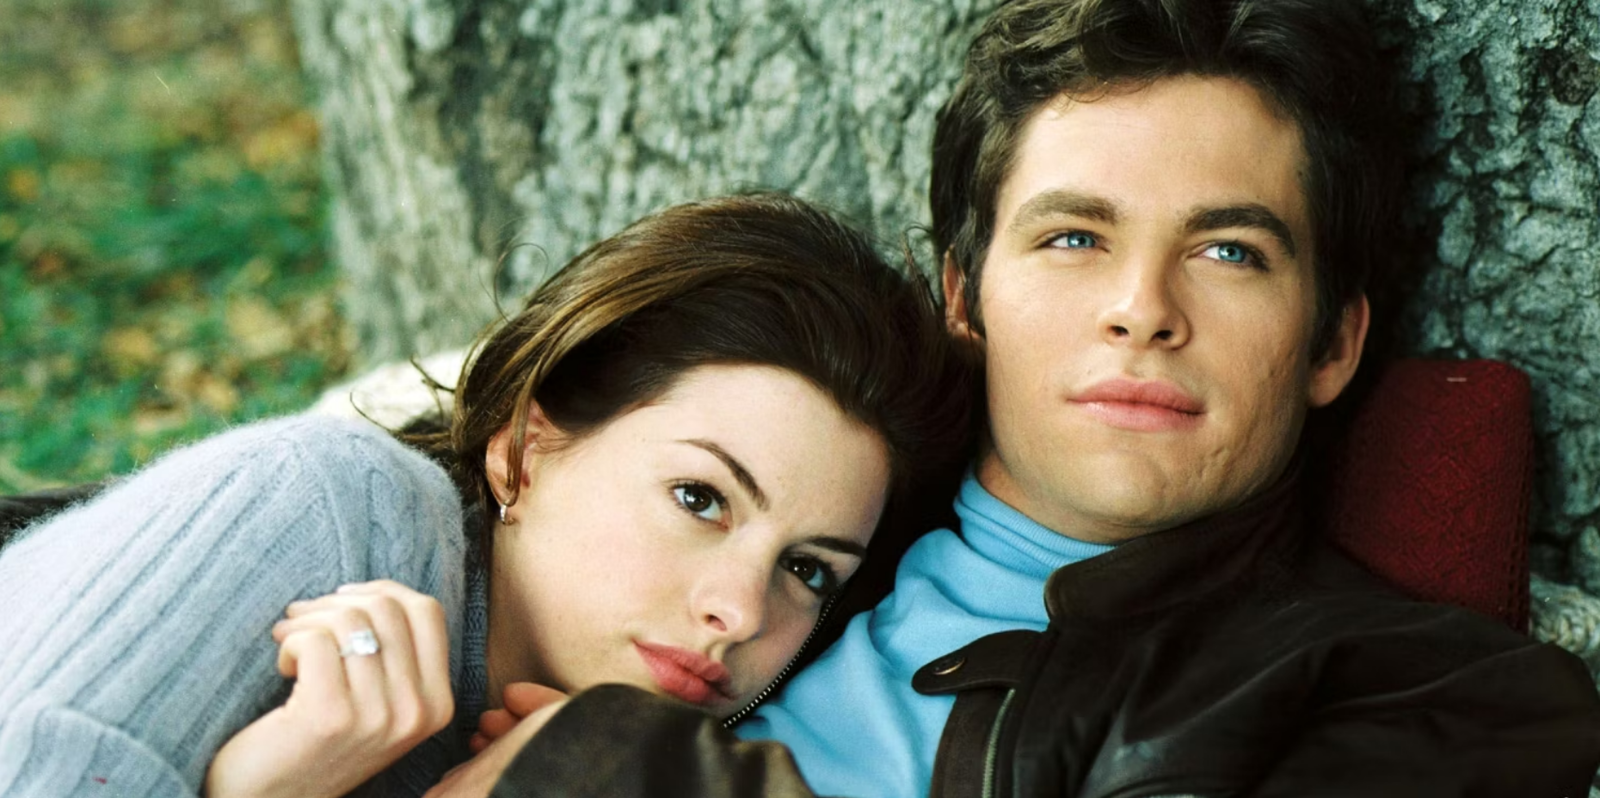 Anne Hathaway and Chris Pine in The Princess Diaries 2: Royal Engagement